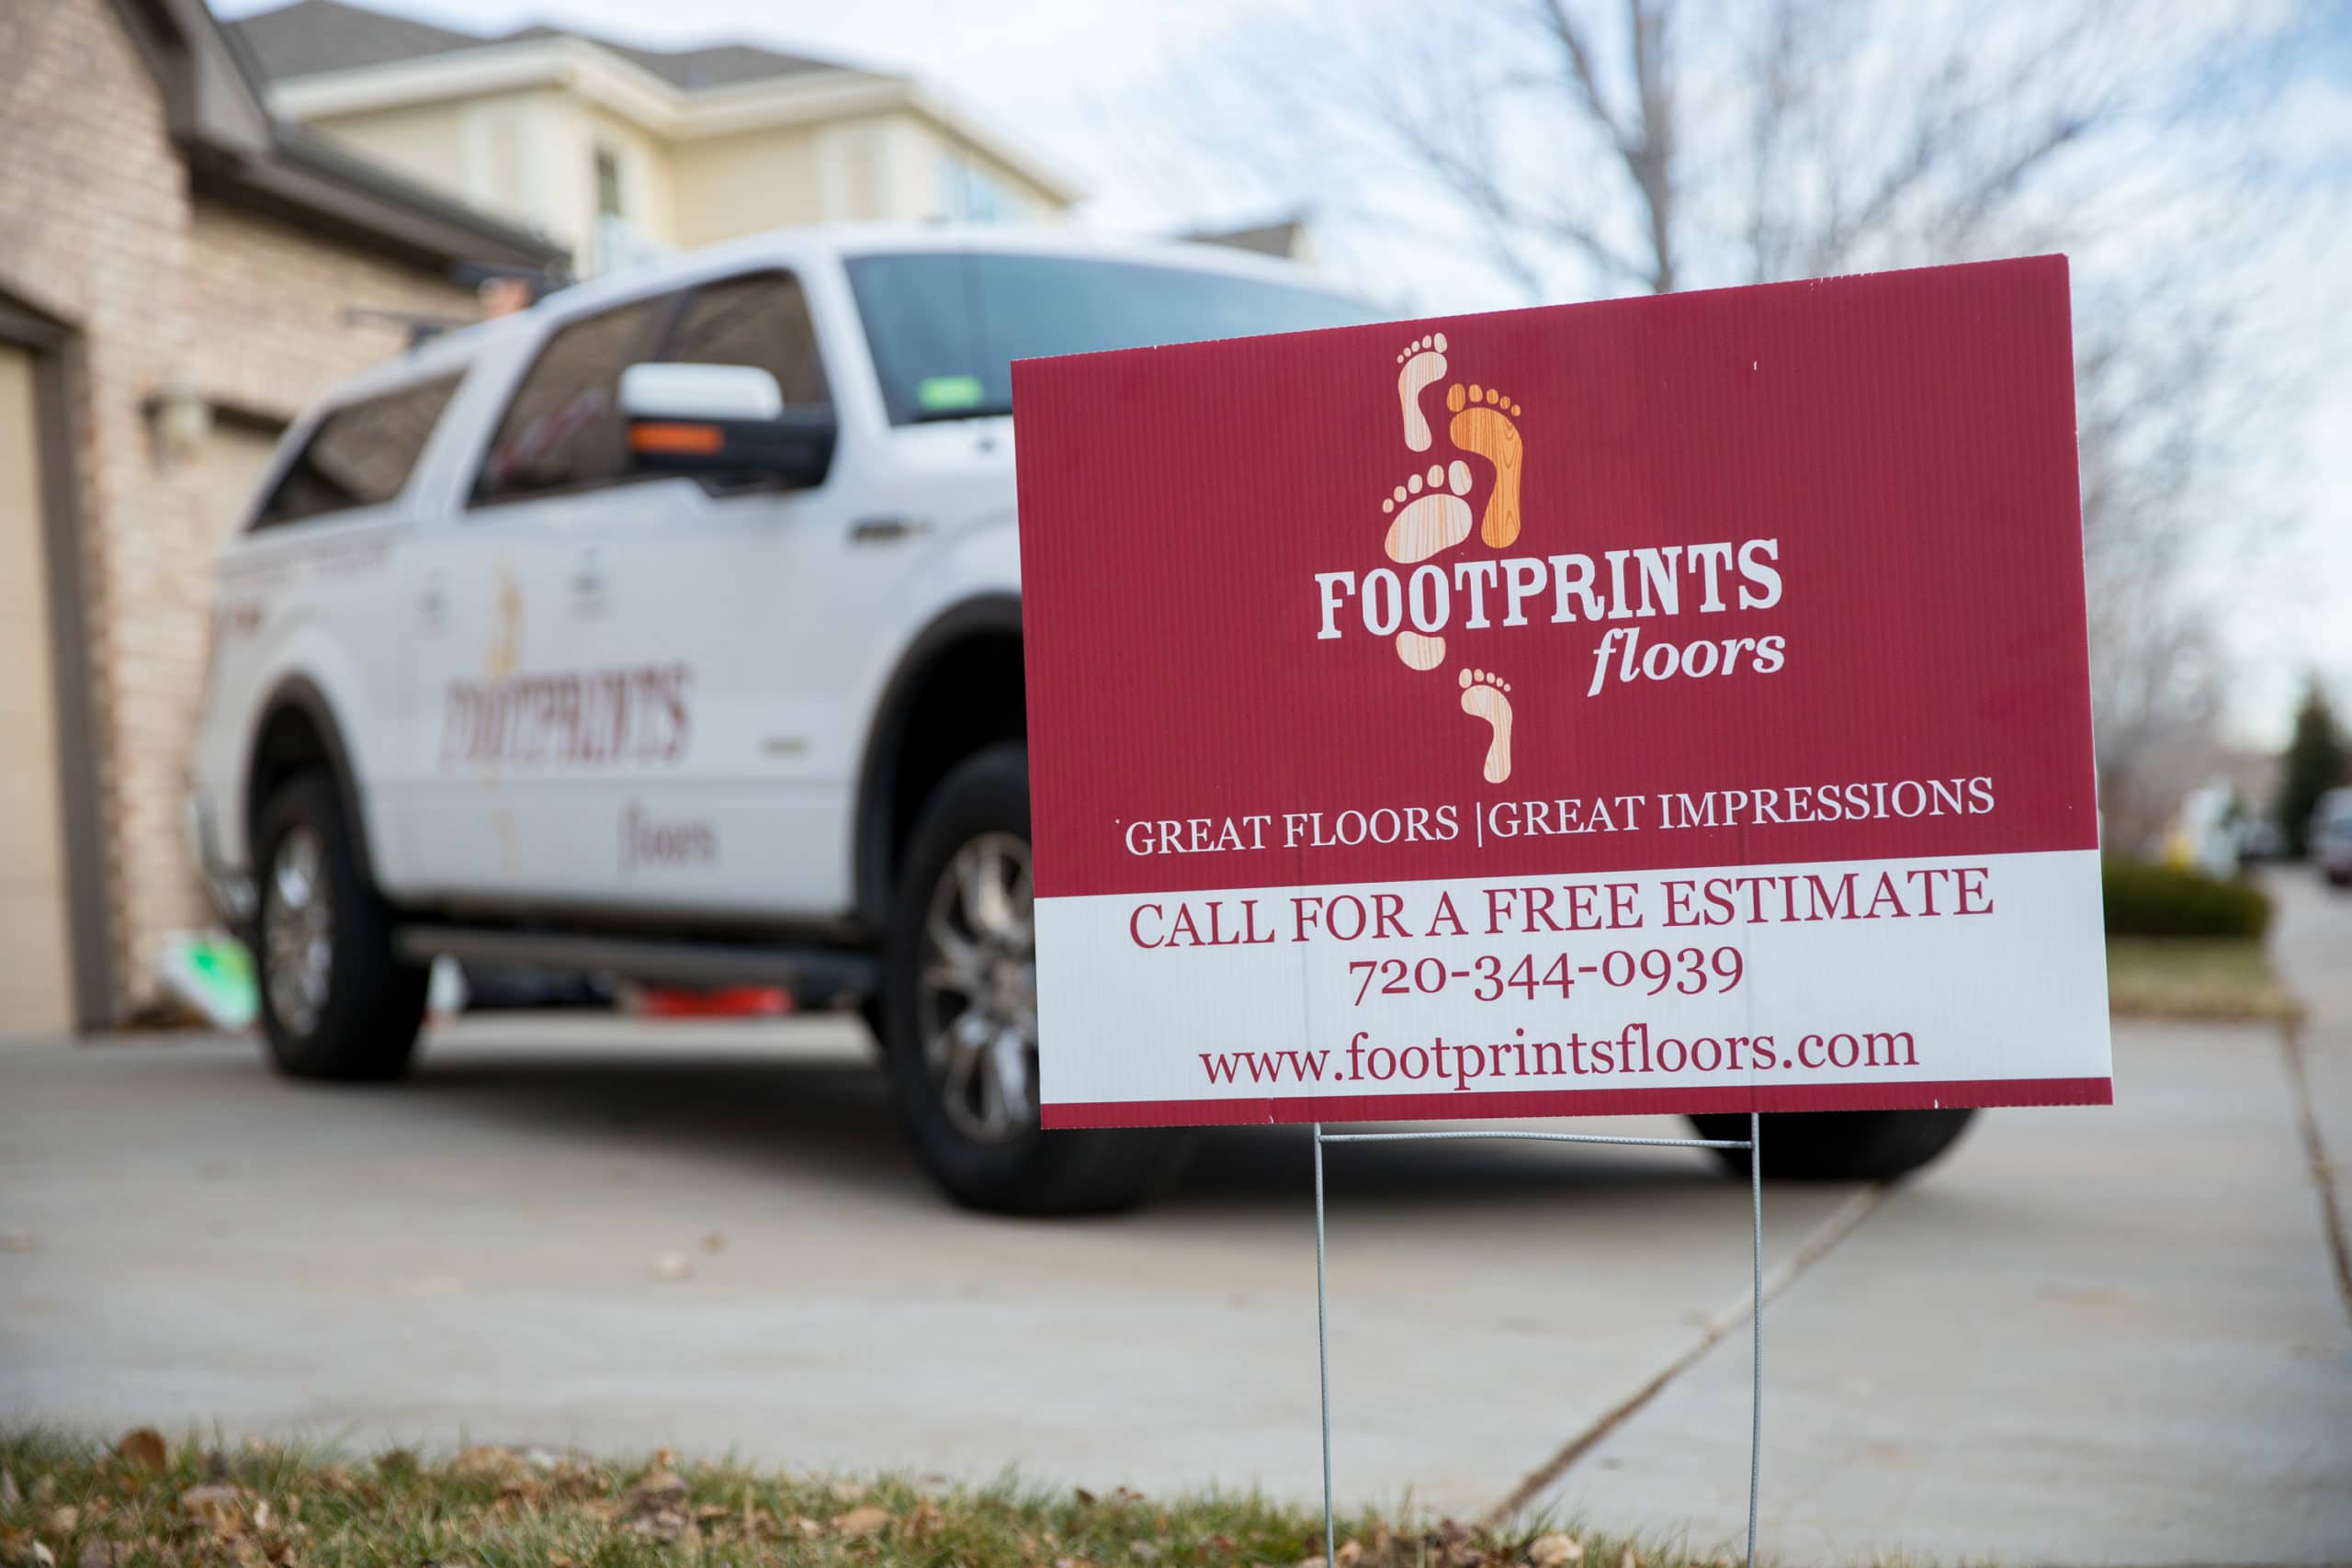 Footprints Floors sign in front yard demonstrates business growth and benefits of self-employment.